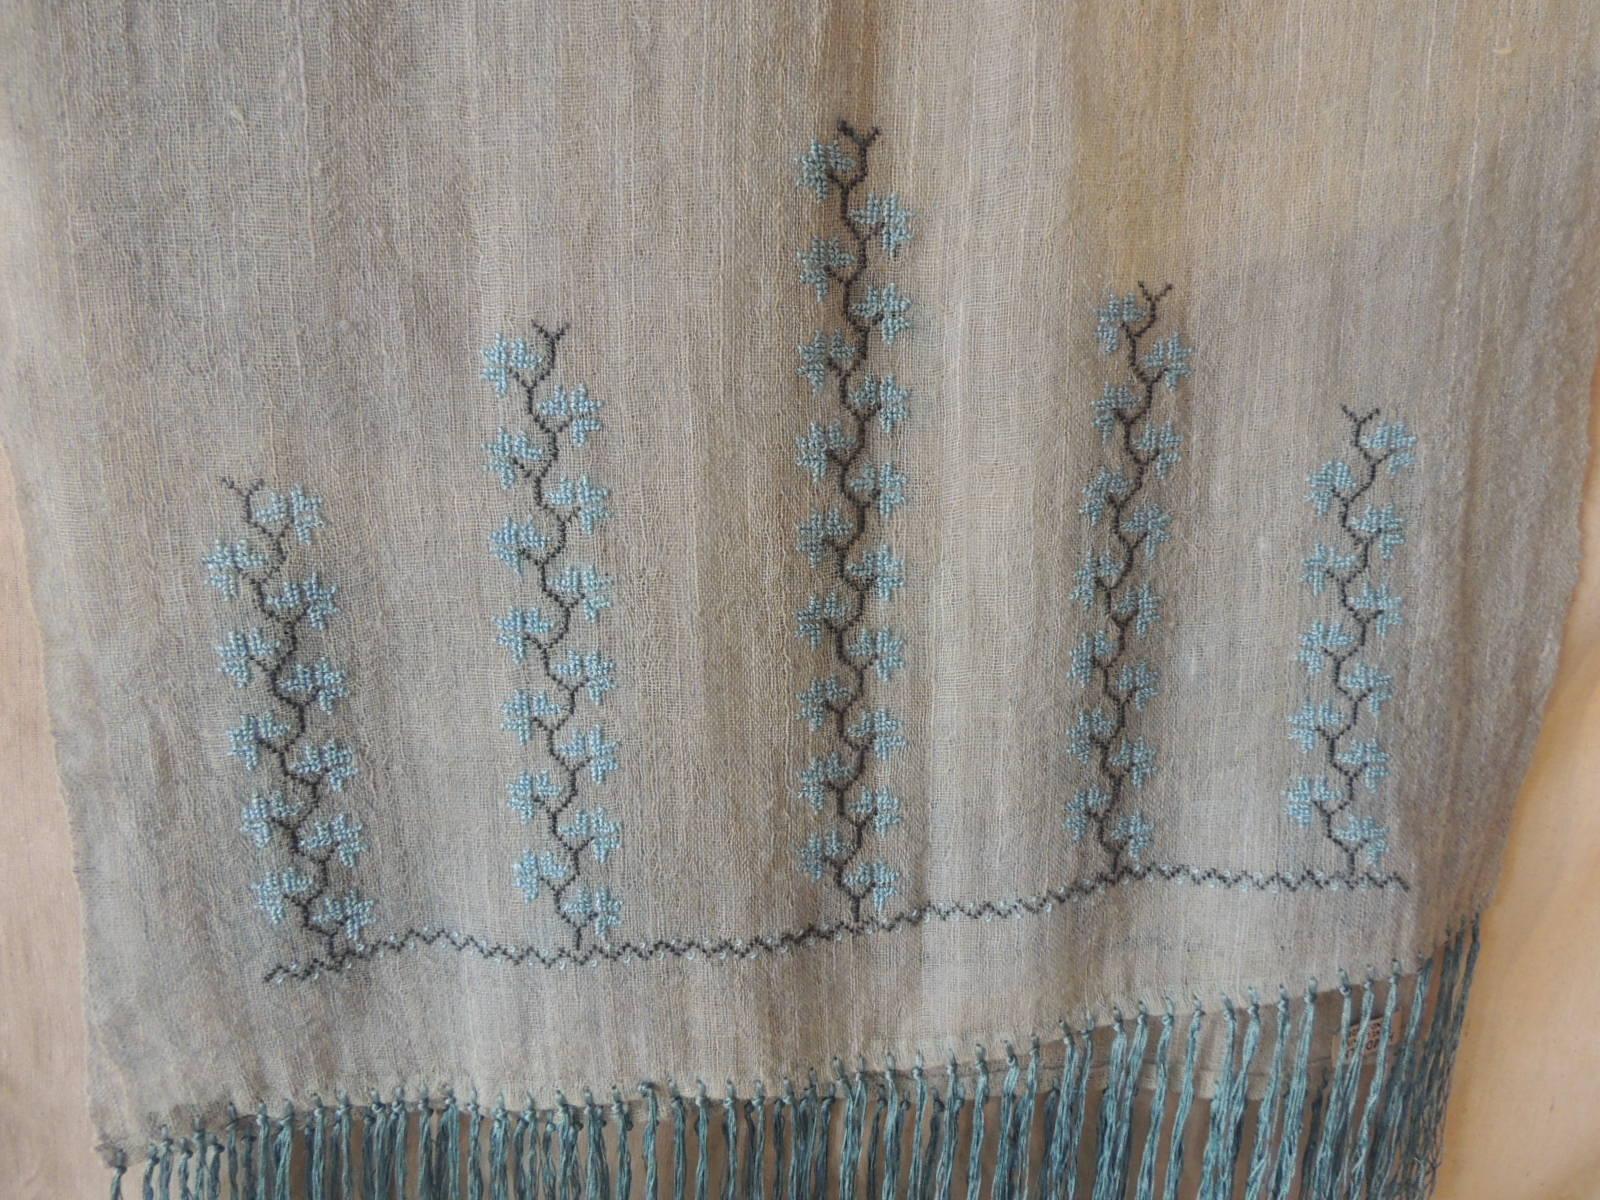 Long aqua embroidered camel hair scarf with long fringes.
Scarf or throw.
Floral pattern embroidered at both ends.
Fringes are 8